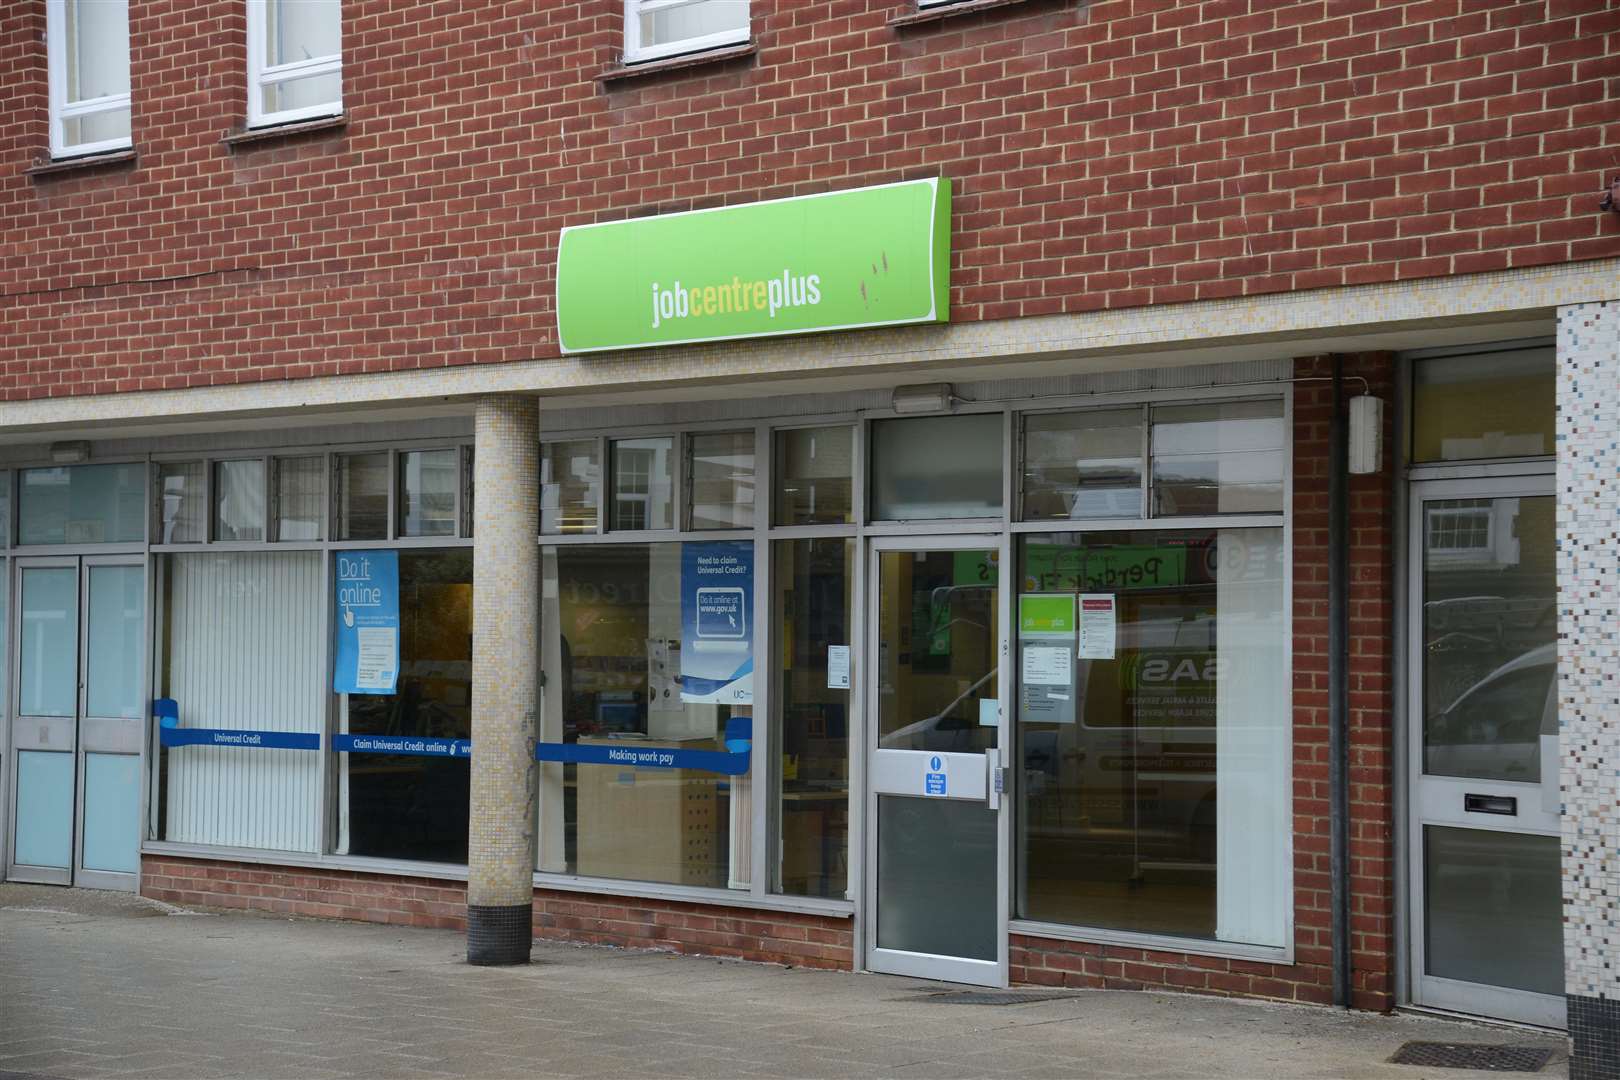 The Herne Bay Jobcentre is to close